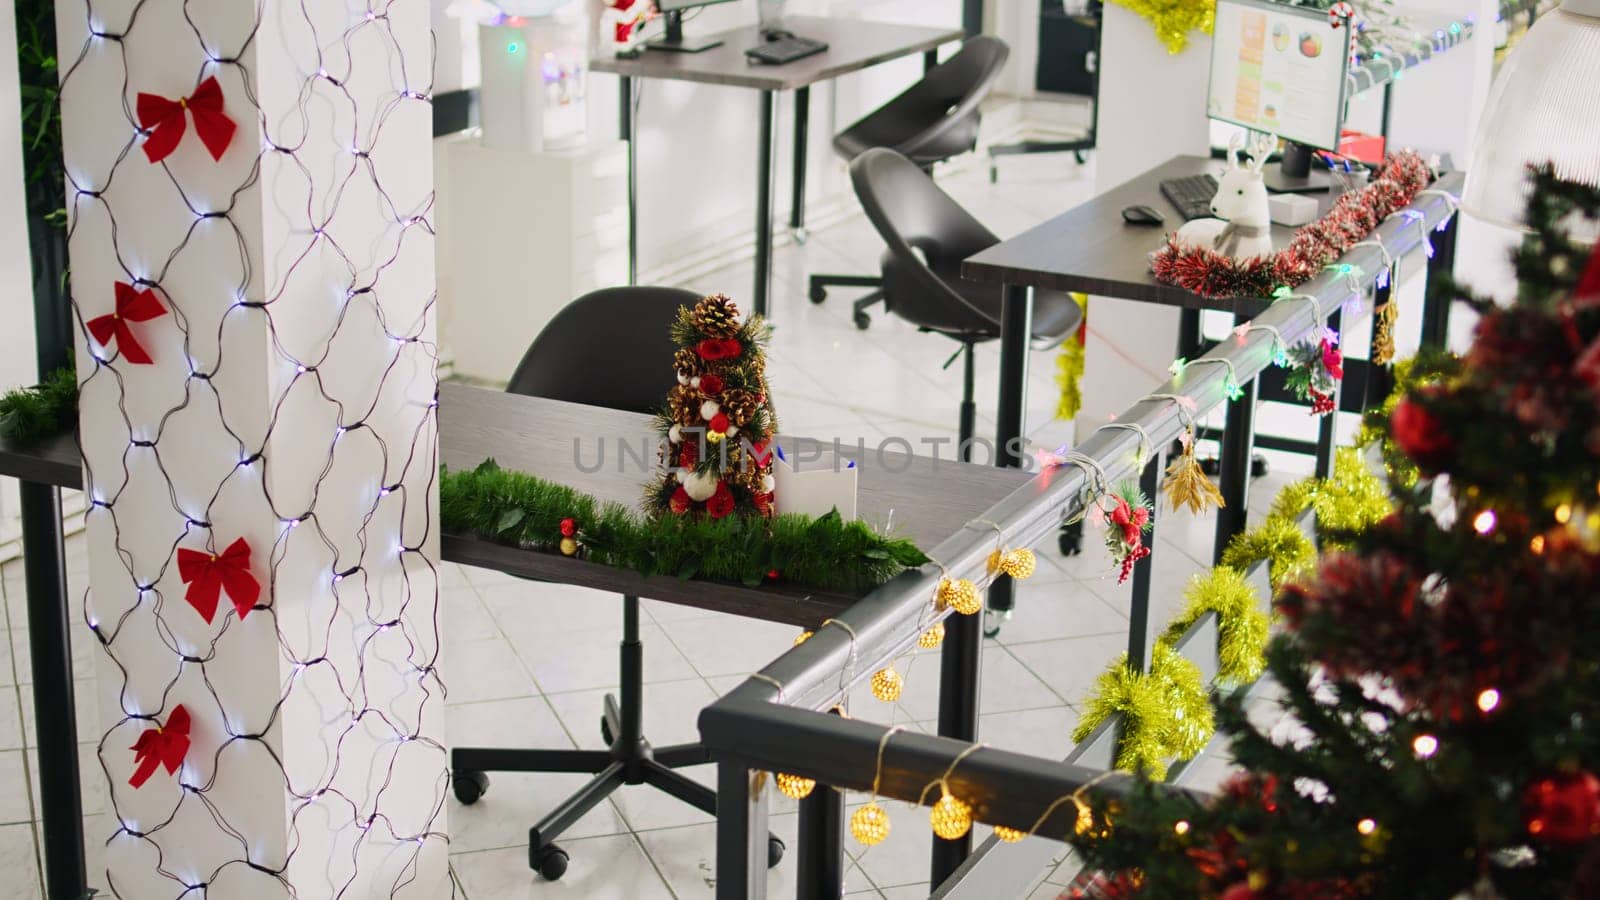 Zoom in on Christmas tree in office by DCStudio